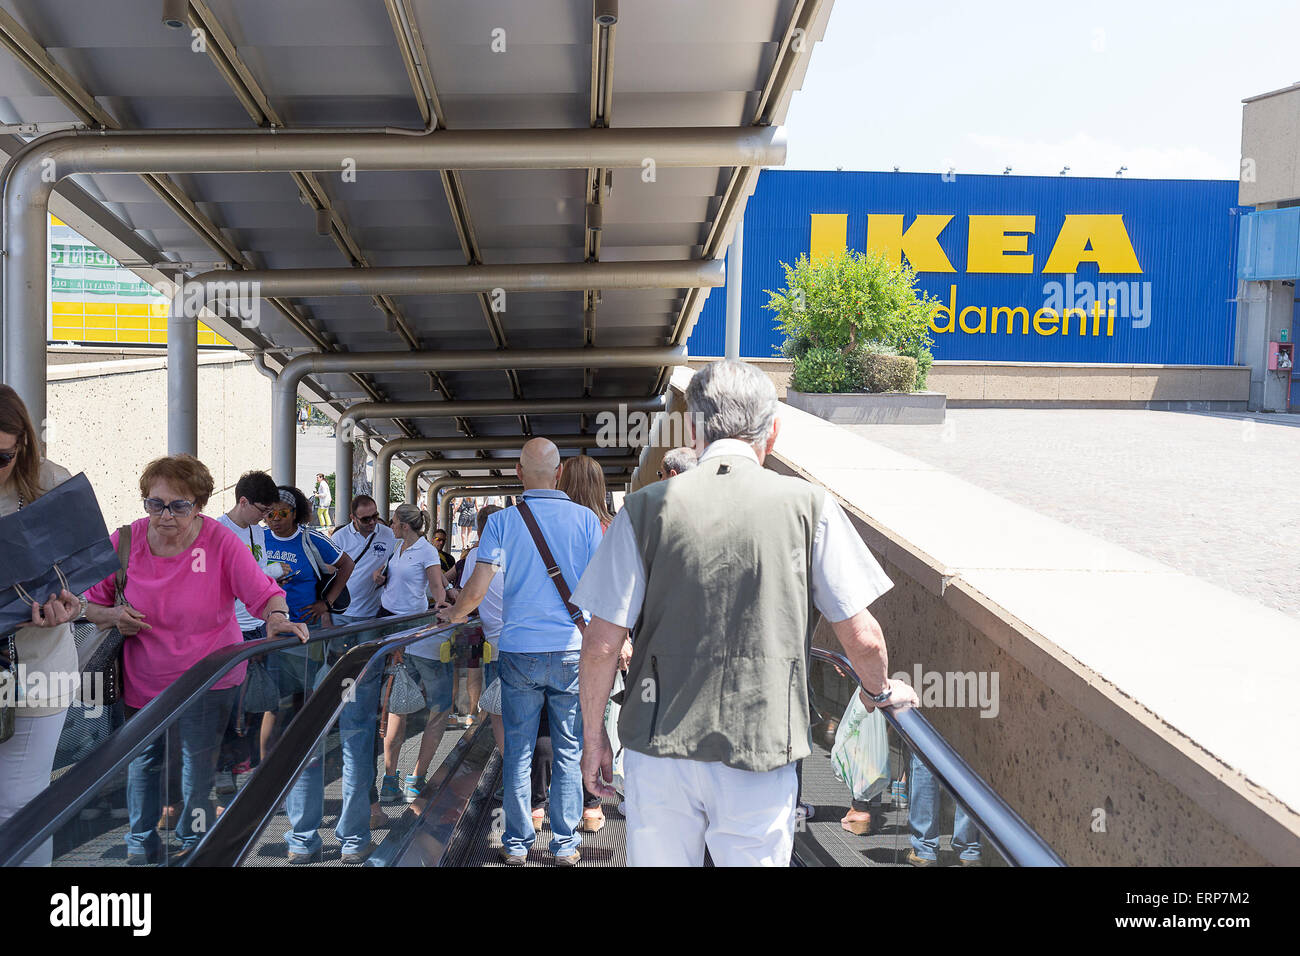 Ikea in rome hi-res stock photography and images - Alamy